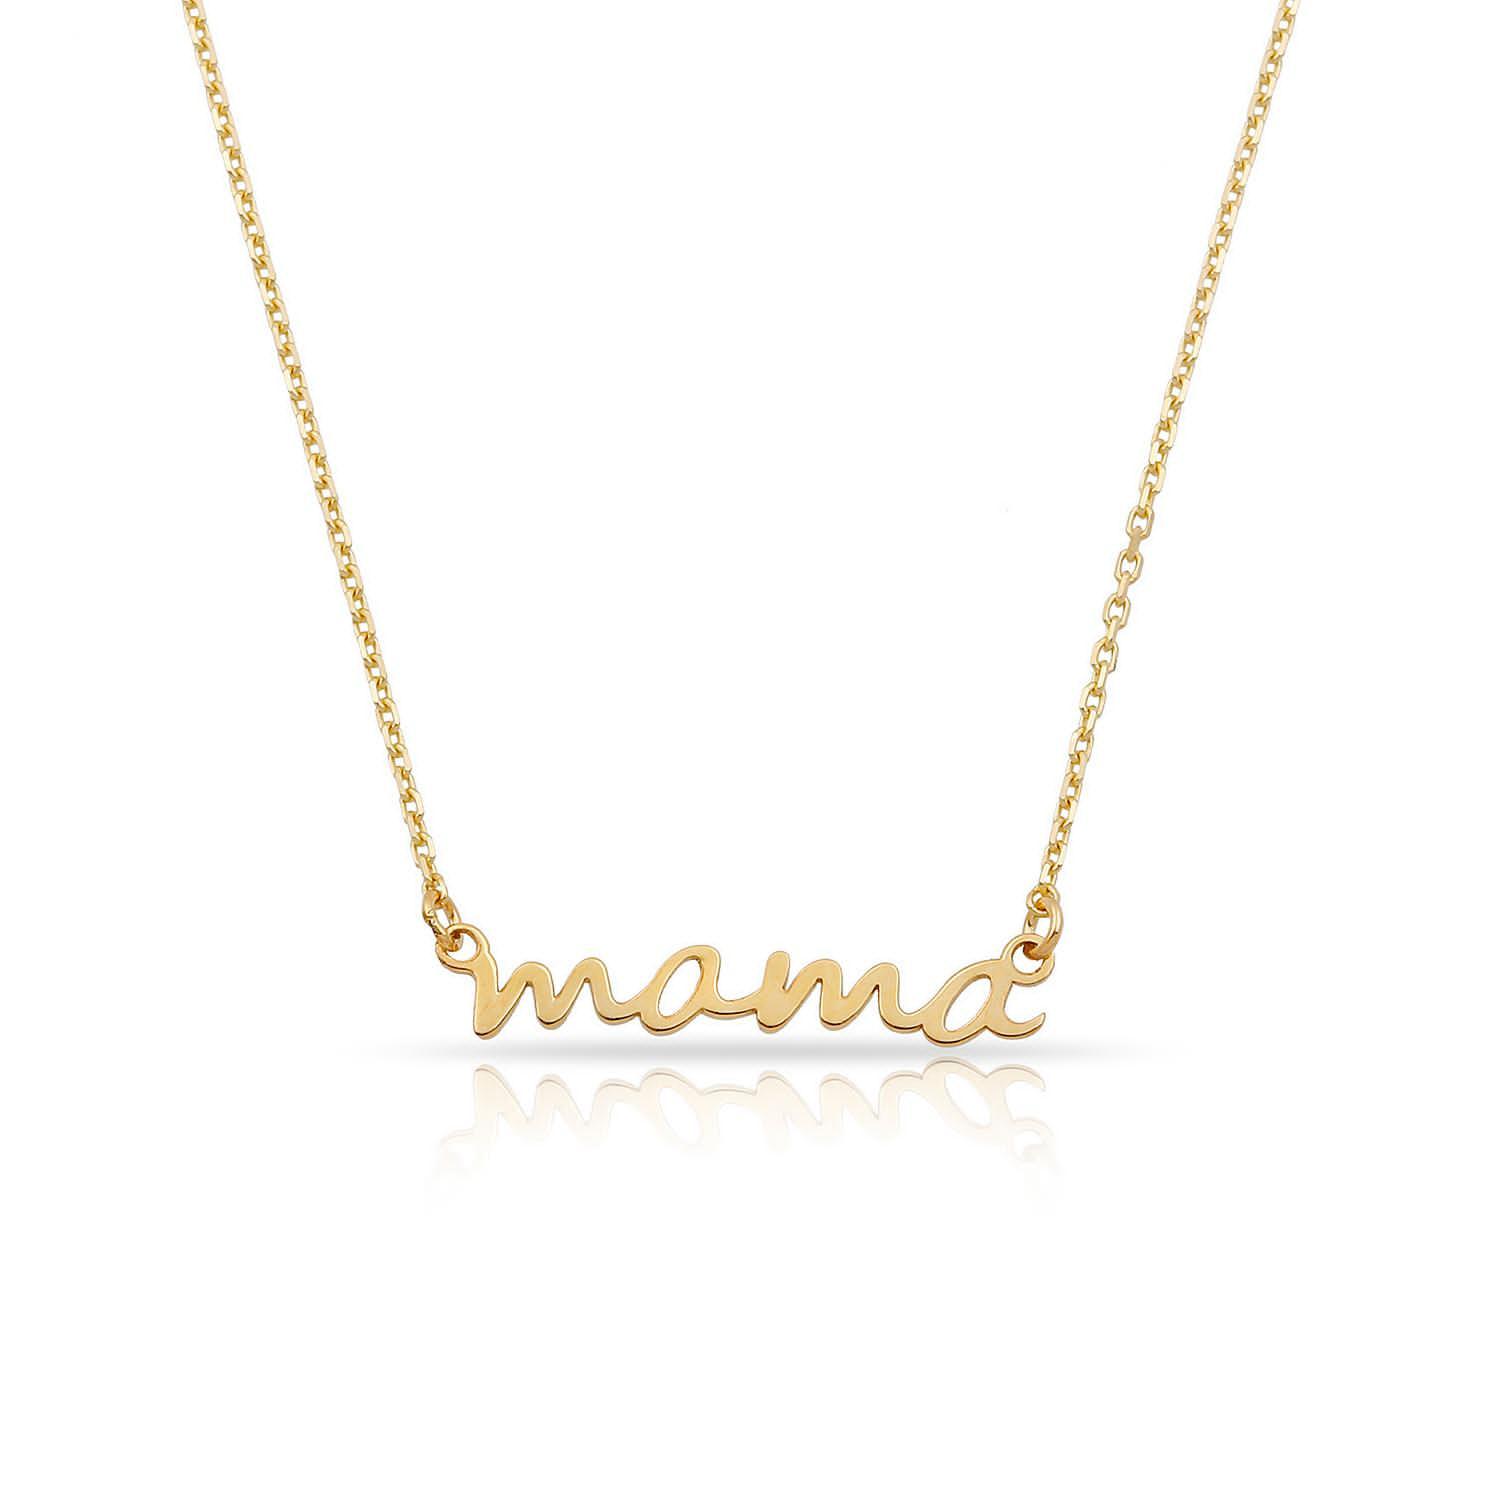 TSK 14k Gold Mama Script Necklace JEWELRY The Sis Kiss 14k Gold